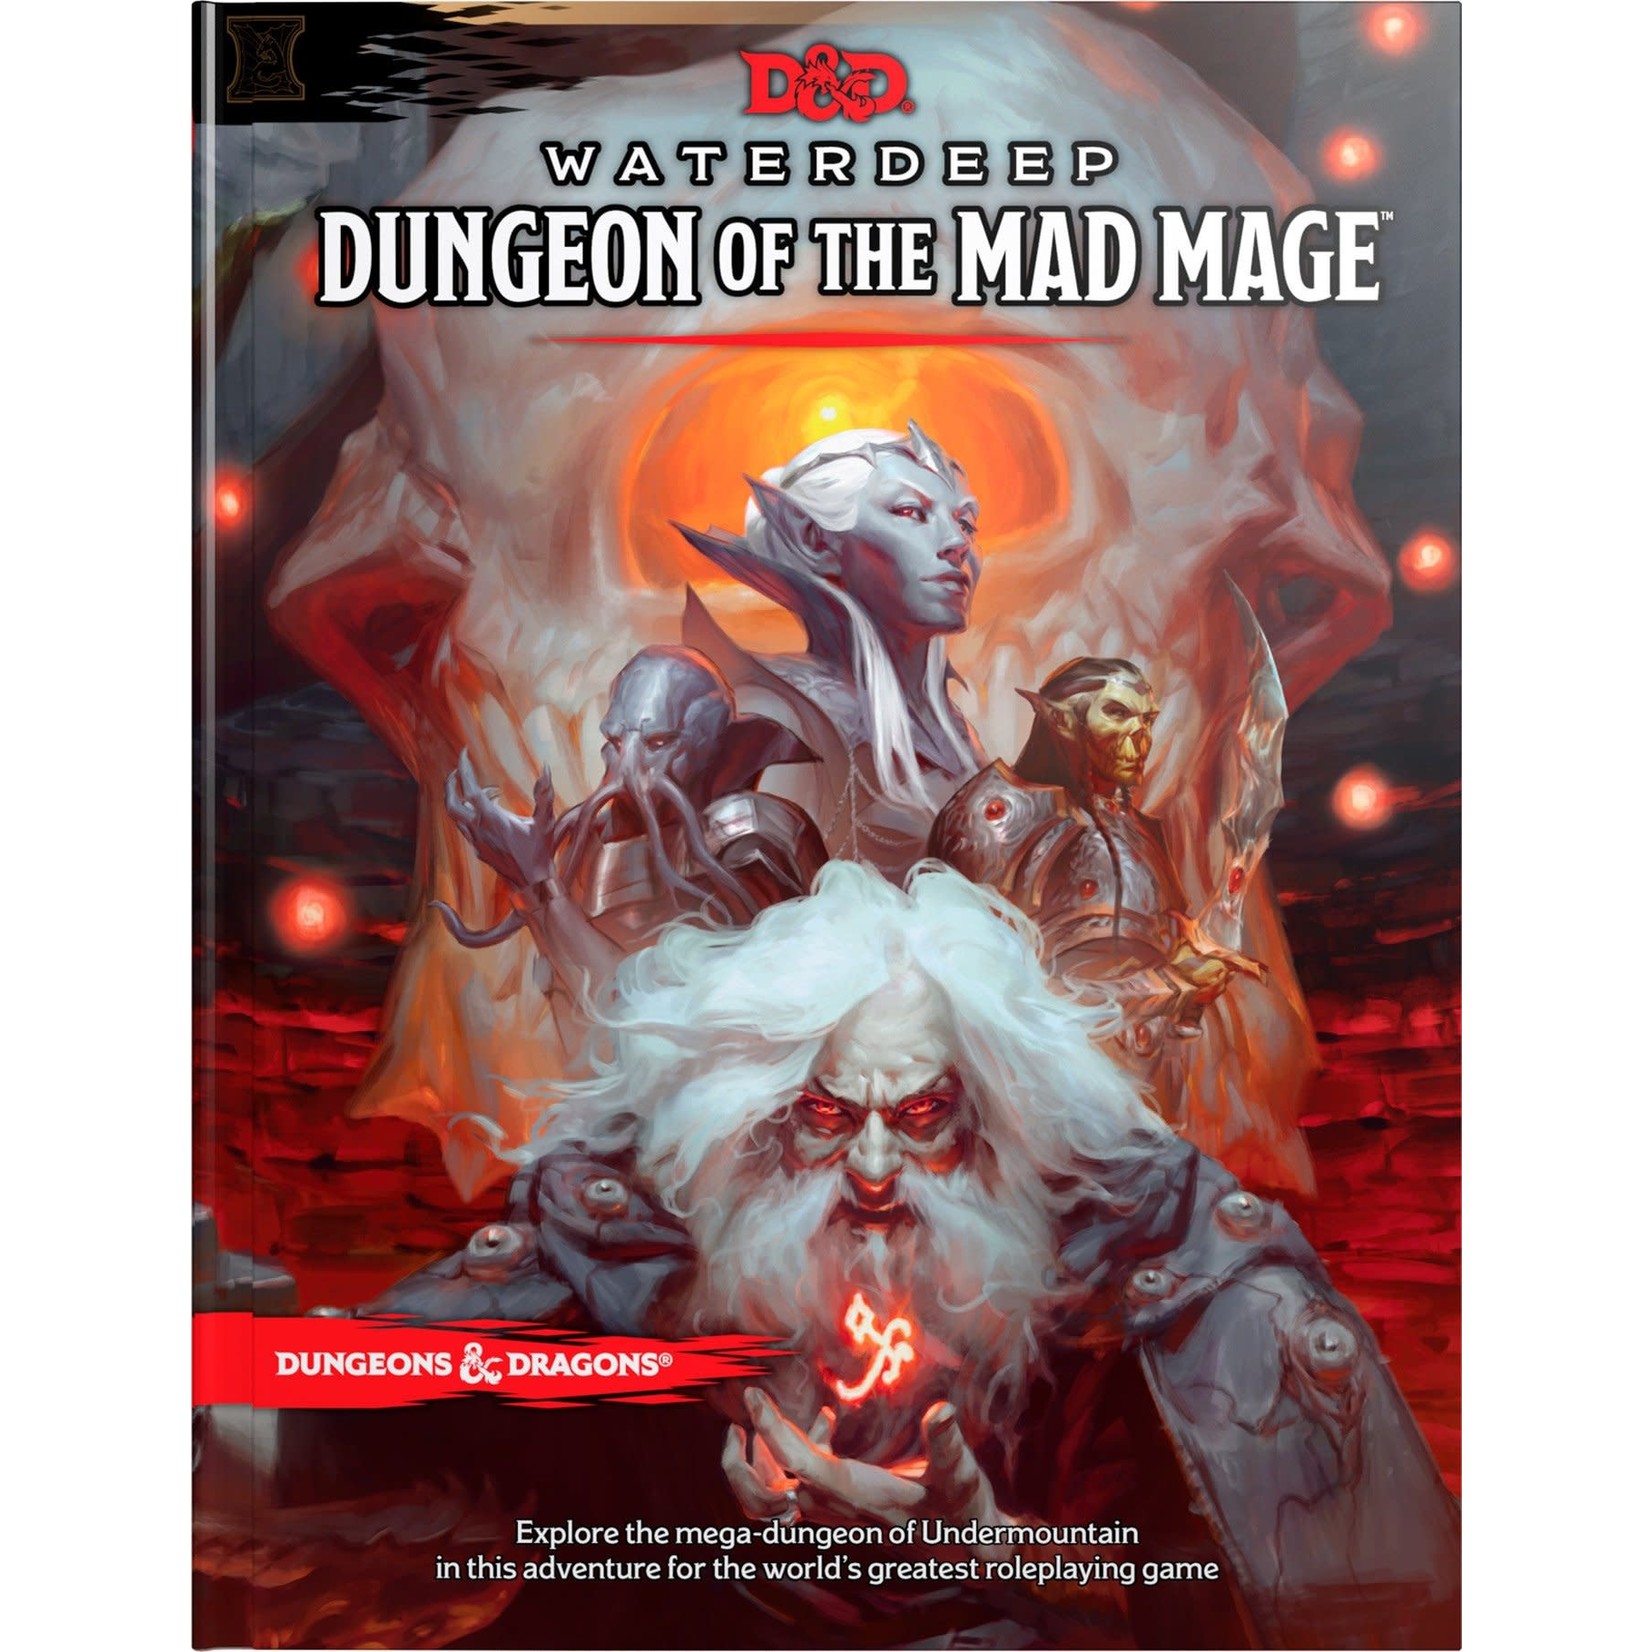 Wizards of the Coast 5E D&D Campaign Book: Waterdeep Dungeon of the Mad Mage